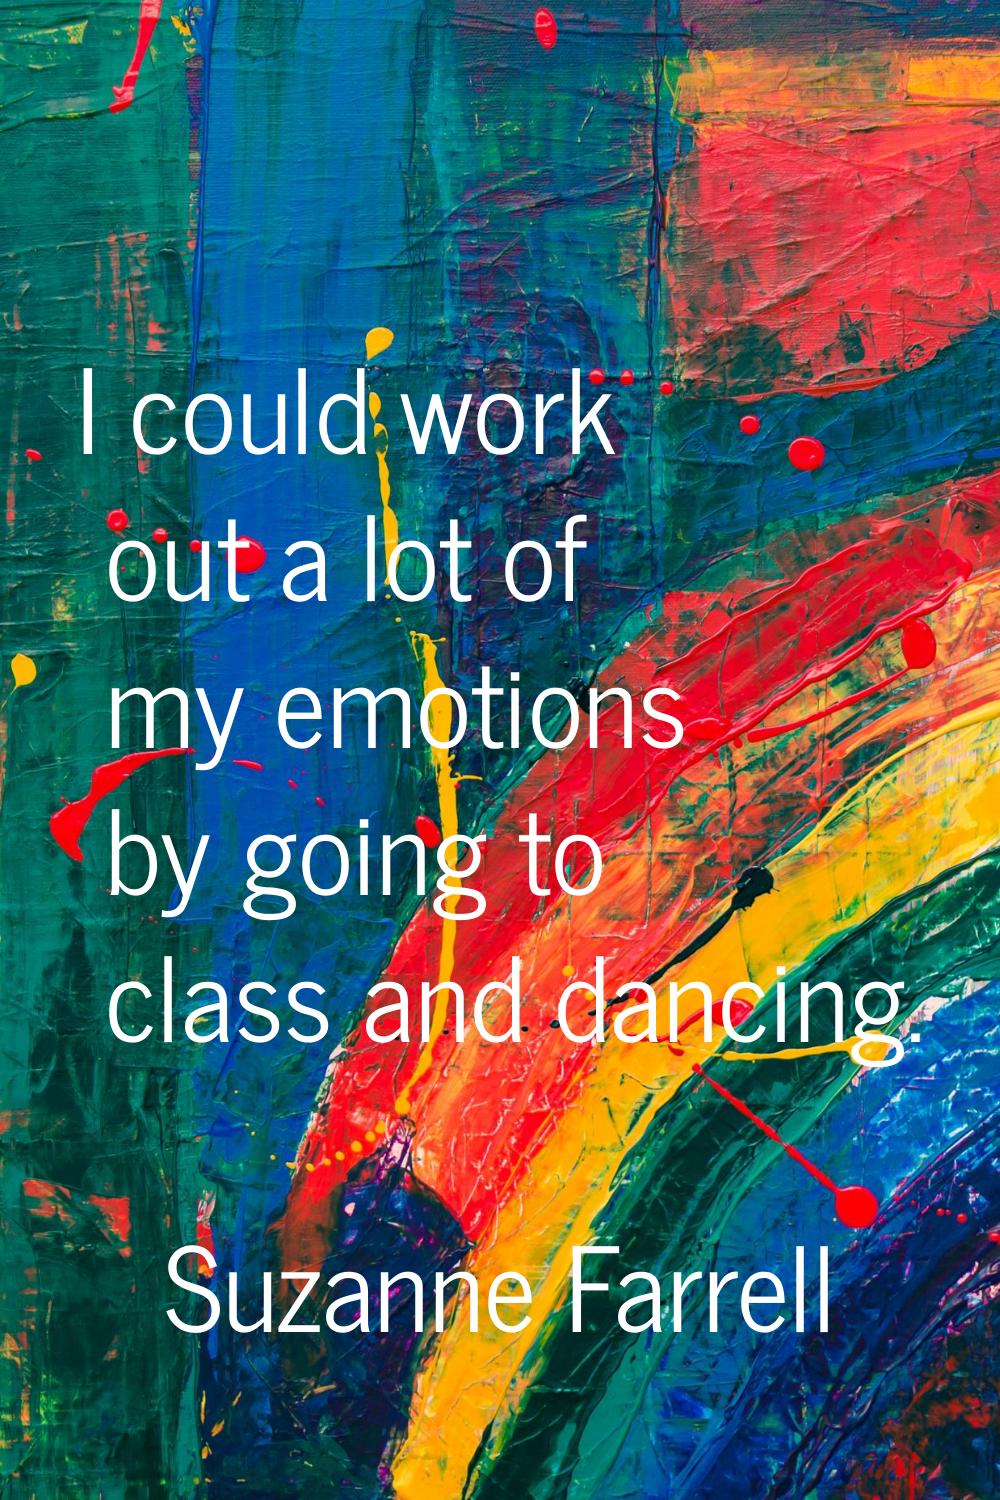 I could work out a lot of my emotions by going to class and dancing.